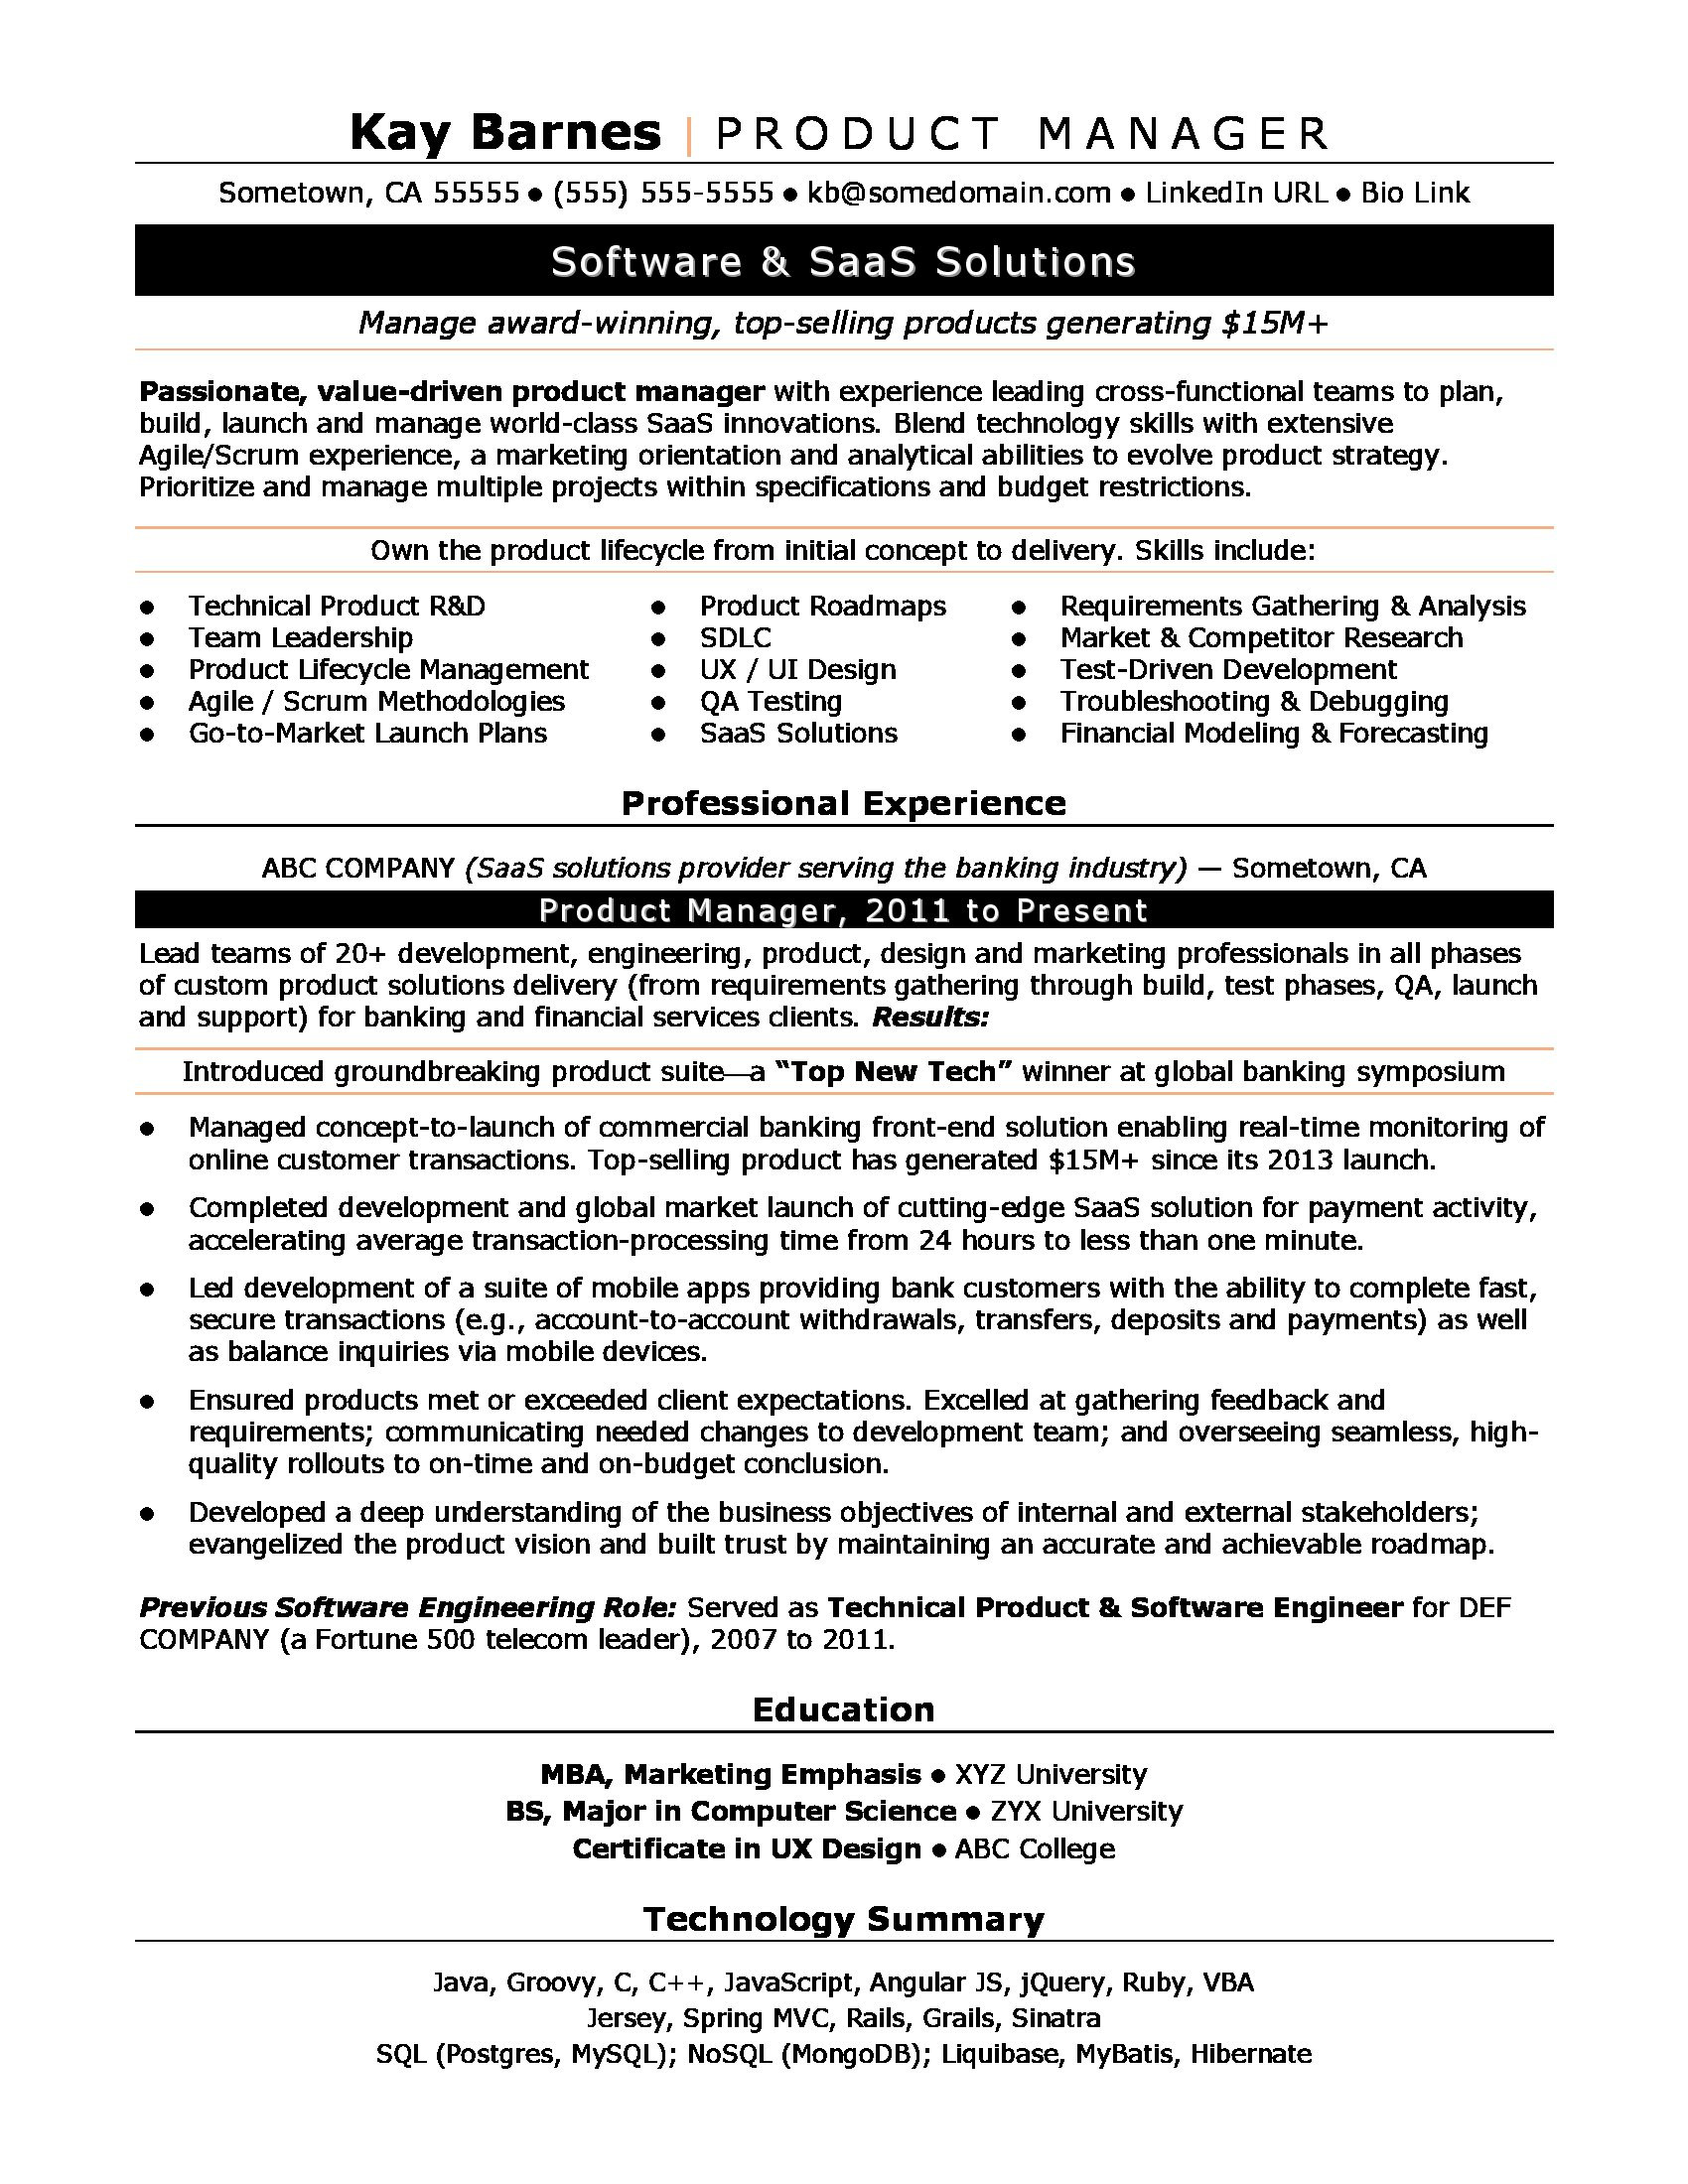 Top Medical Account Manager Resume Sample Product Manager Resume Sample Monster.com